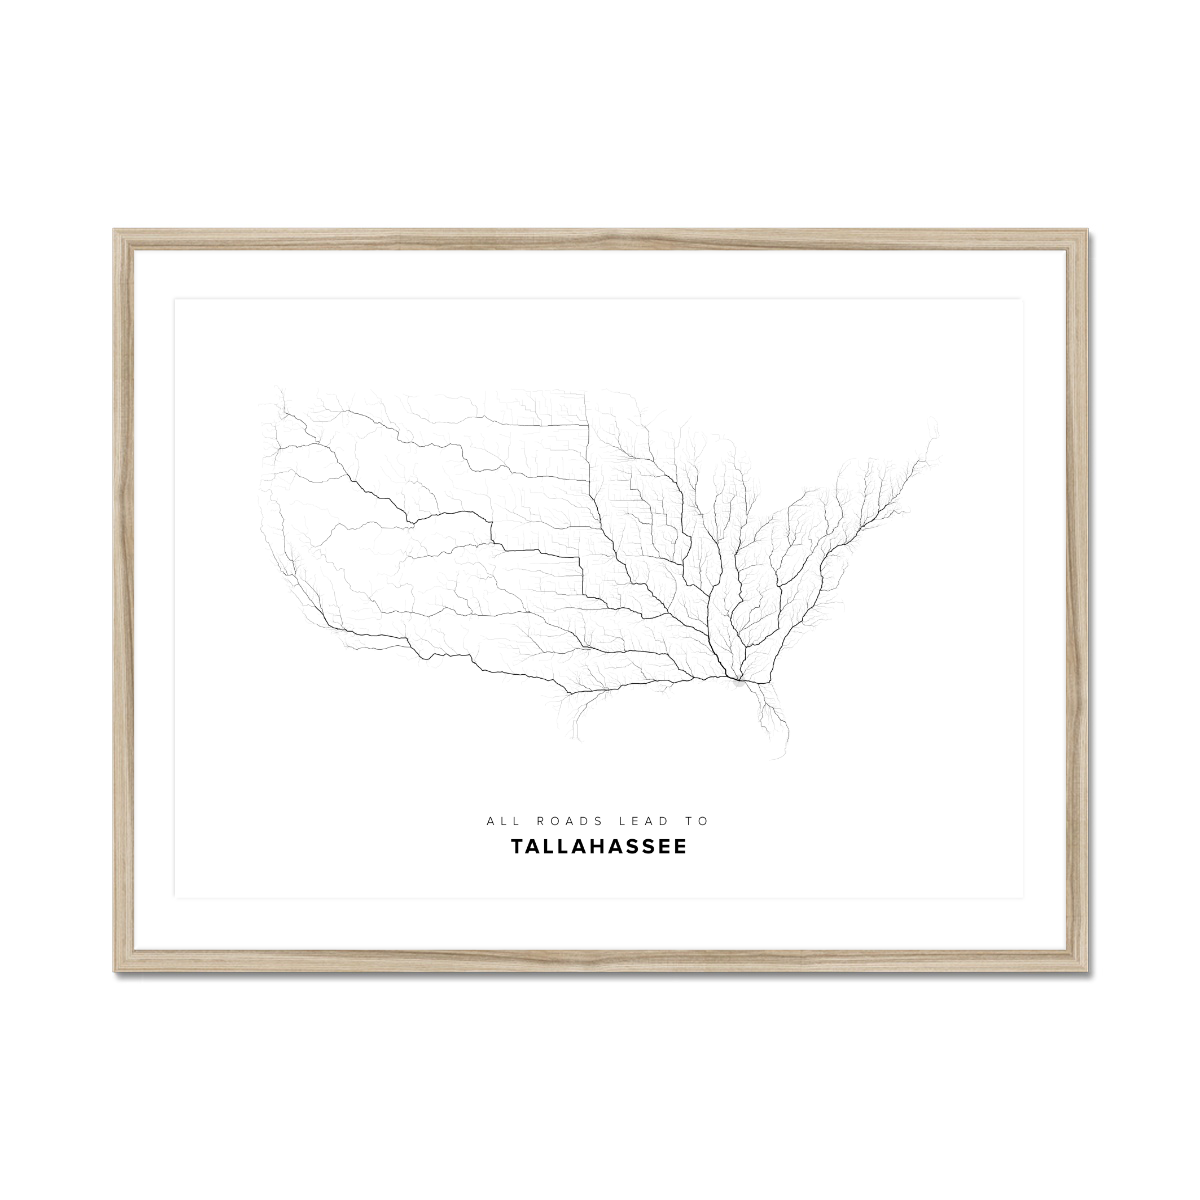 All roads lead to Tallahassee (United States of America) Fine Art Map Print